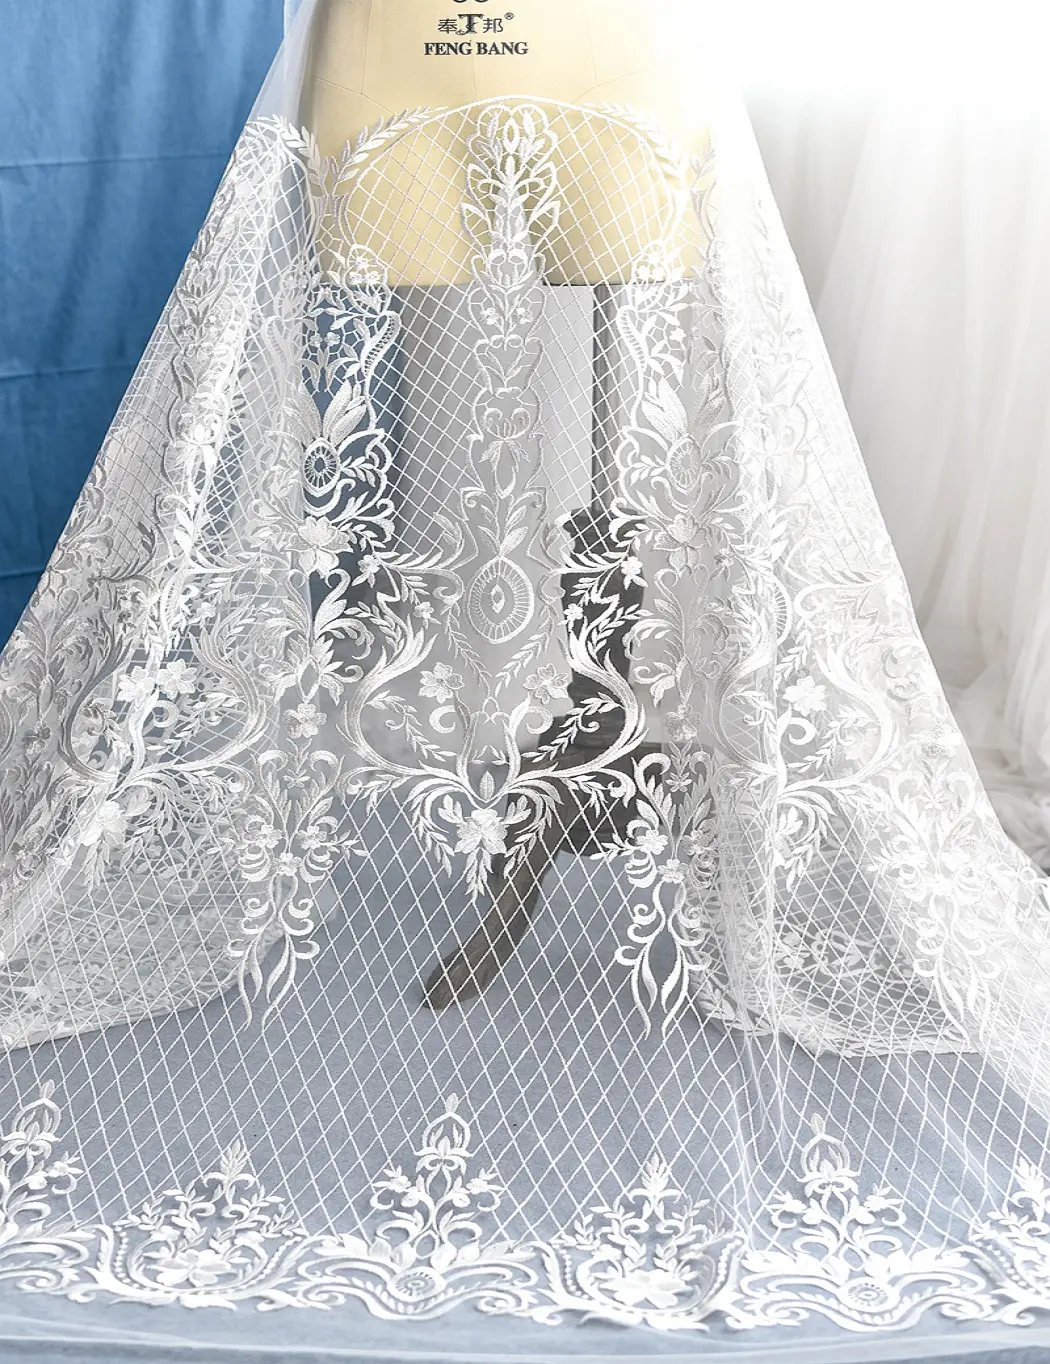 New mesh bridal embroidery lace fabric wedding dress handmade diy fabric clothing decoration materials accessories